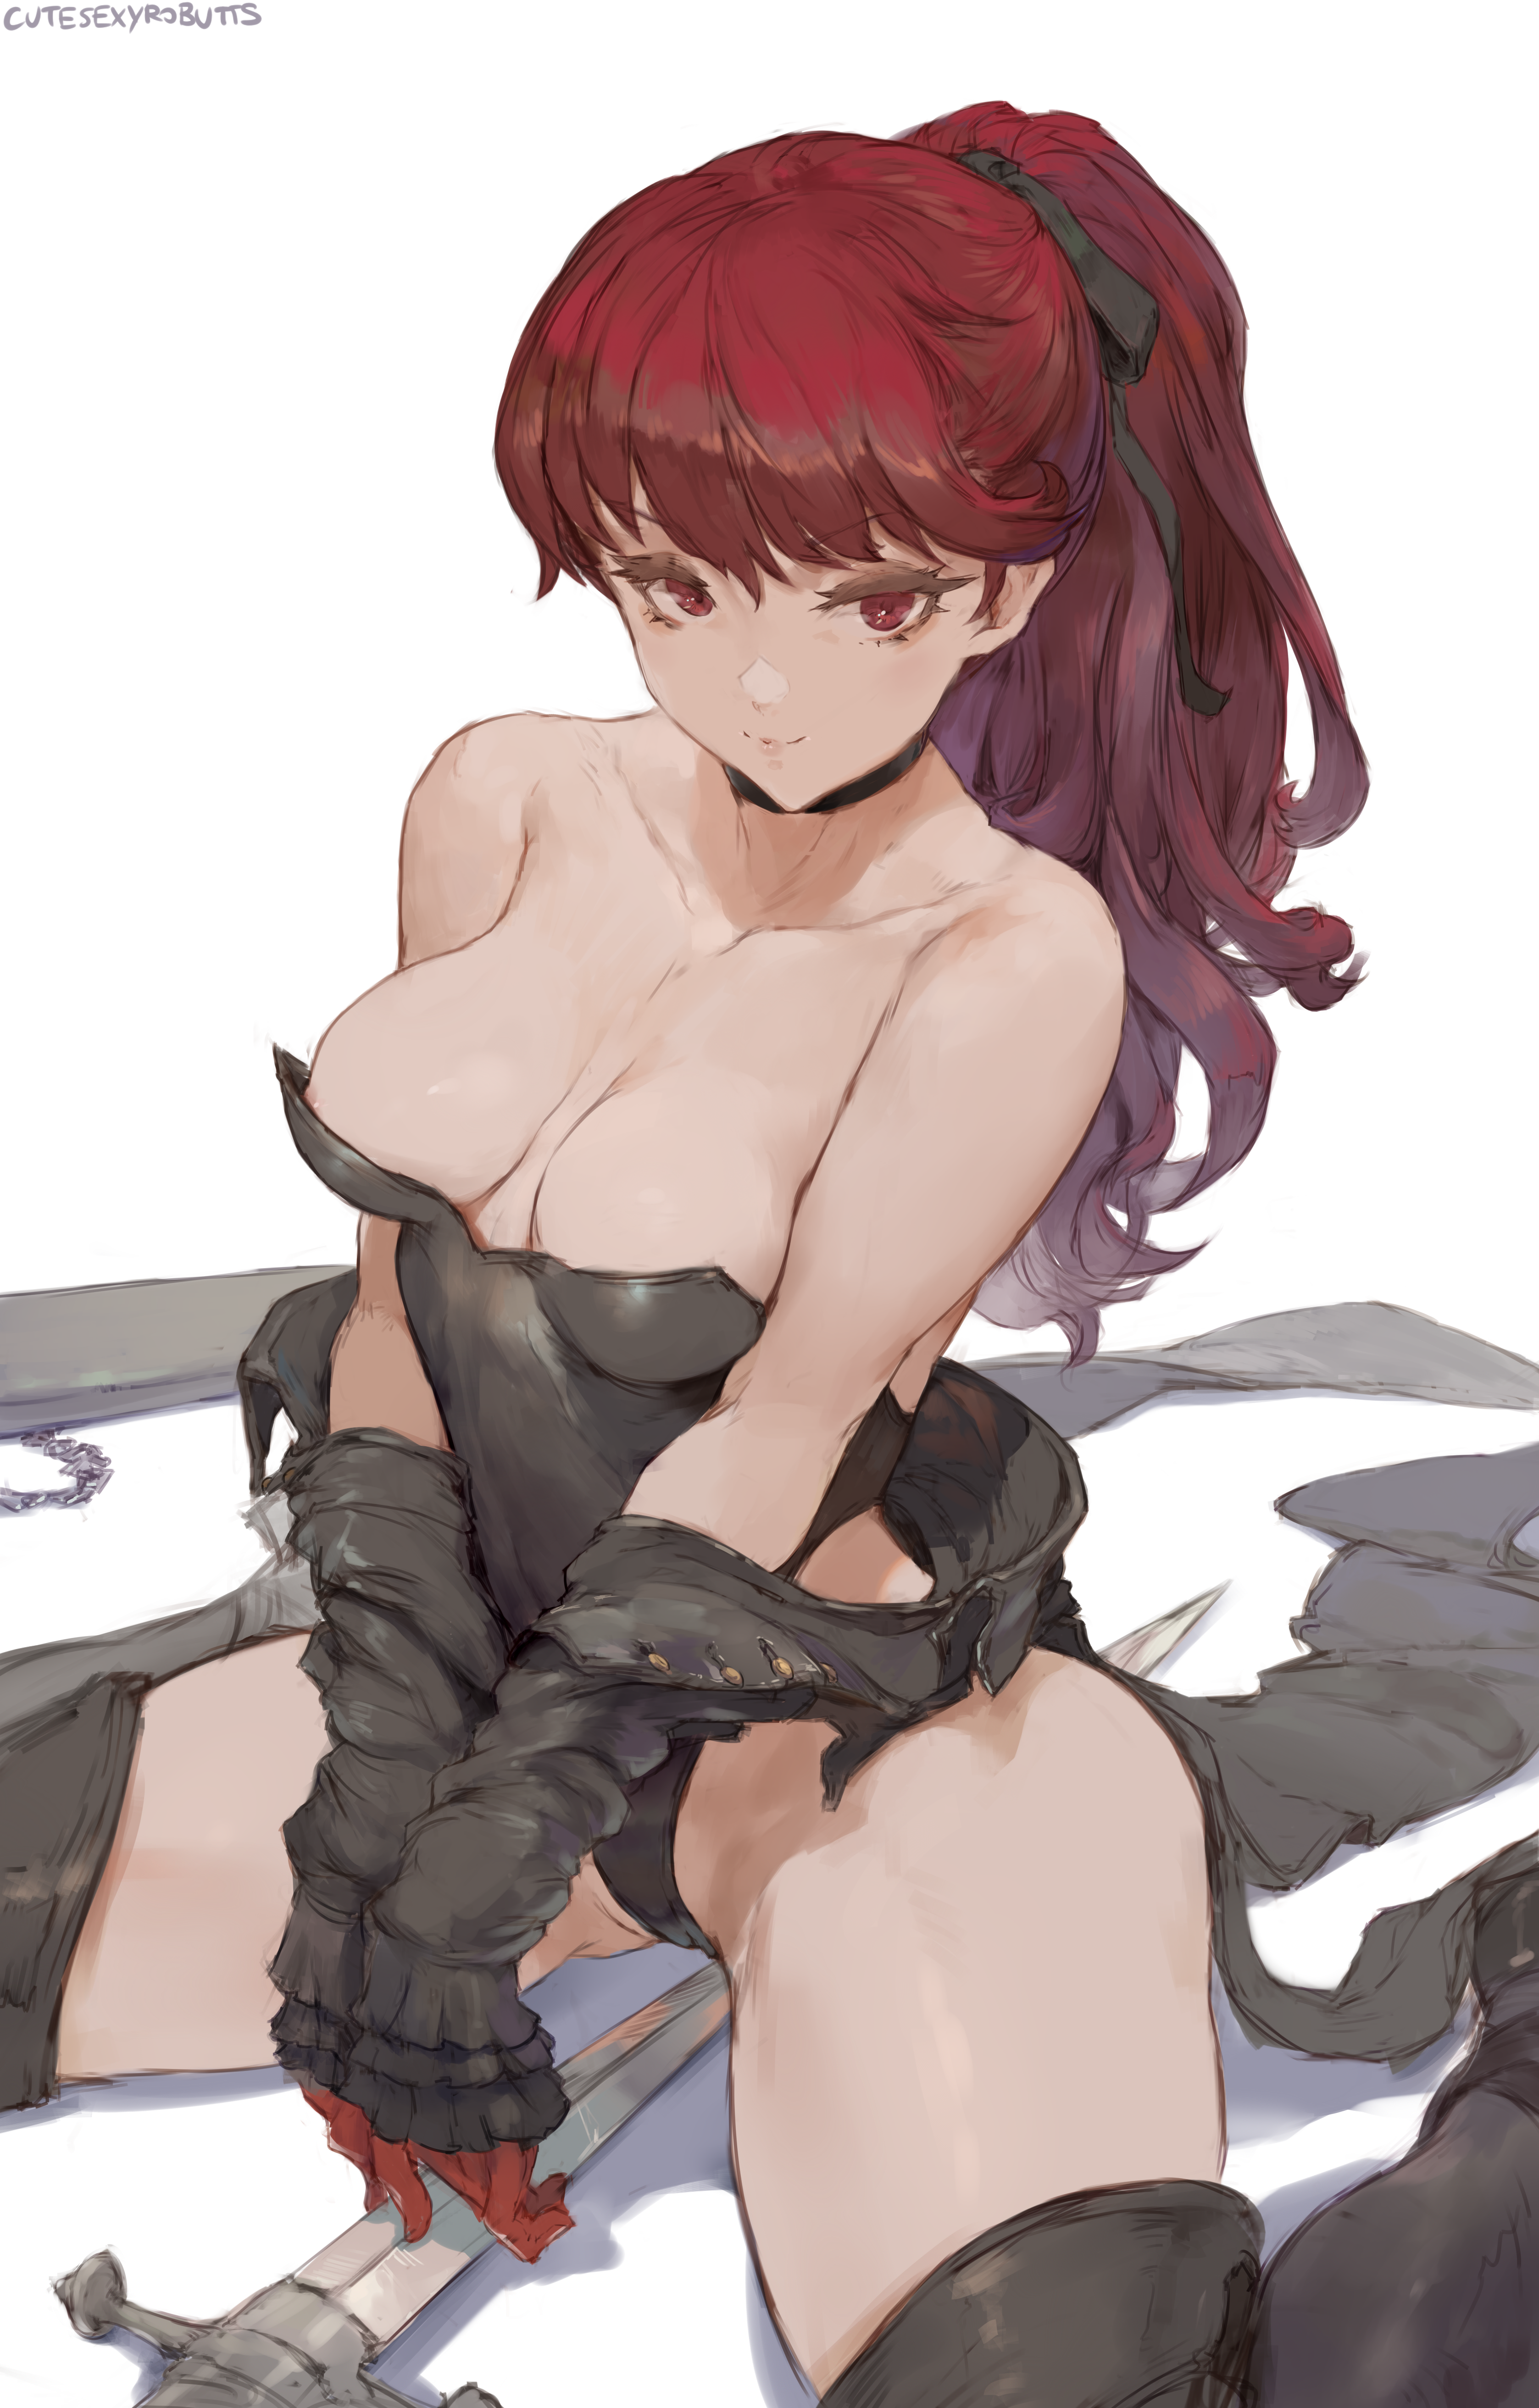 Anime 3355x5250 Kasumi Yoshizawa Persona 5 Persona series video games anime girls video game girls anime redhead ponytail bangs red eyes looking at viewer smiling choker bare shoulders cleavage no bra bodysuit leotard thick thigh thighs thigh high boots jacket gloves sword weapon white background kneeling portrait display 2D artwork drawing illustration fan art Cutesexyrobutts